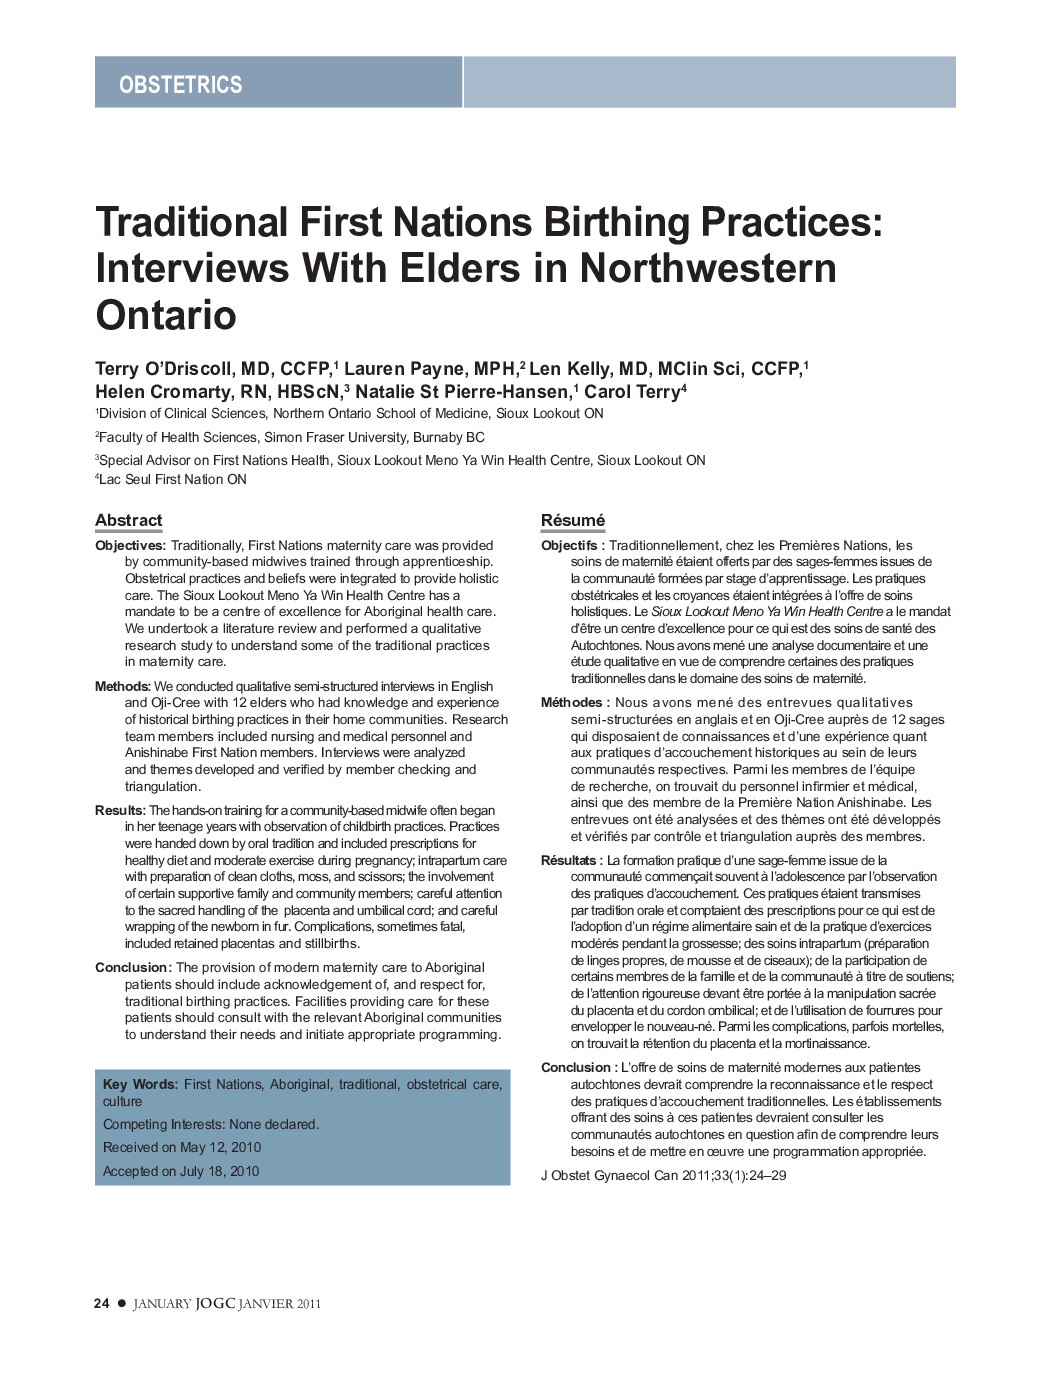 Traditional First Nations Birthing Practices: Interviews With Elders in Northwestern Ontario